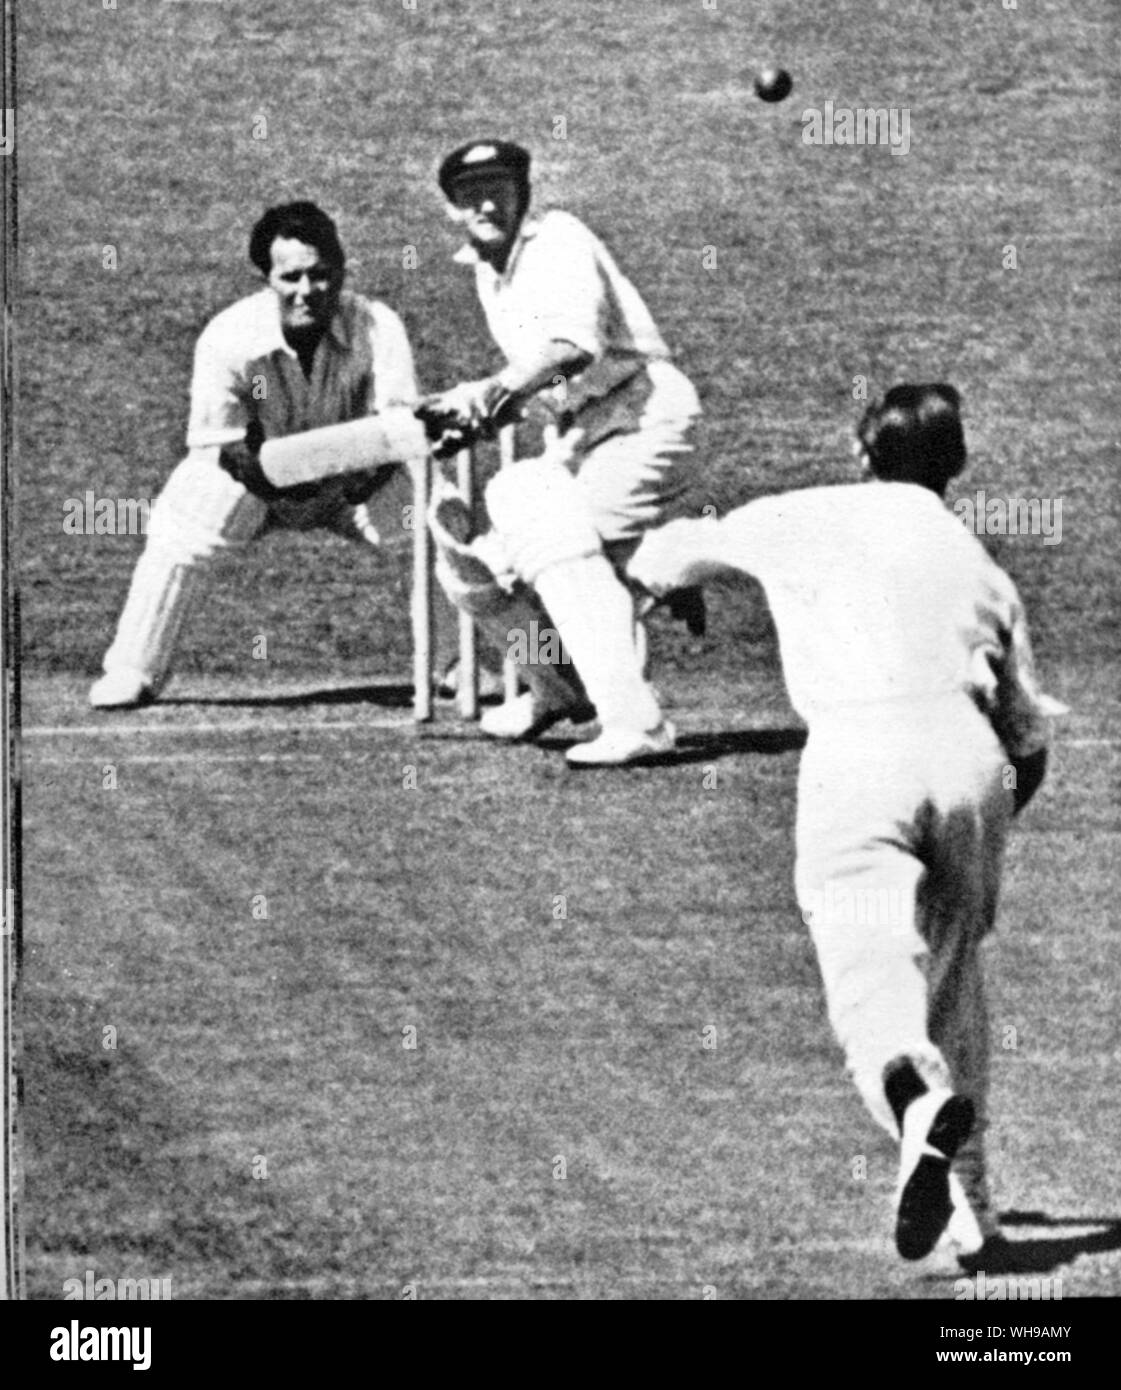 Sir Don G Bradman batting against Essex at Southend in 1948. Peter Smith is the bowler and F Rist is keeping wicket Stock Photo